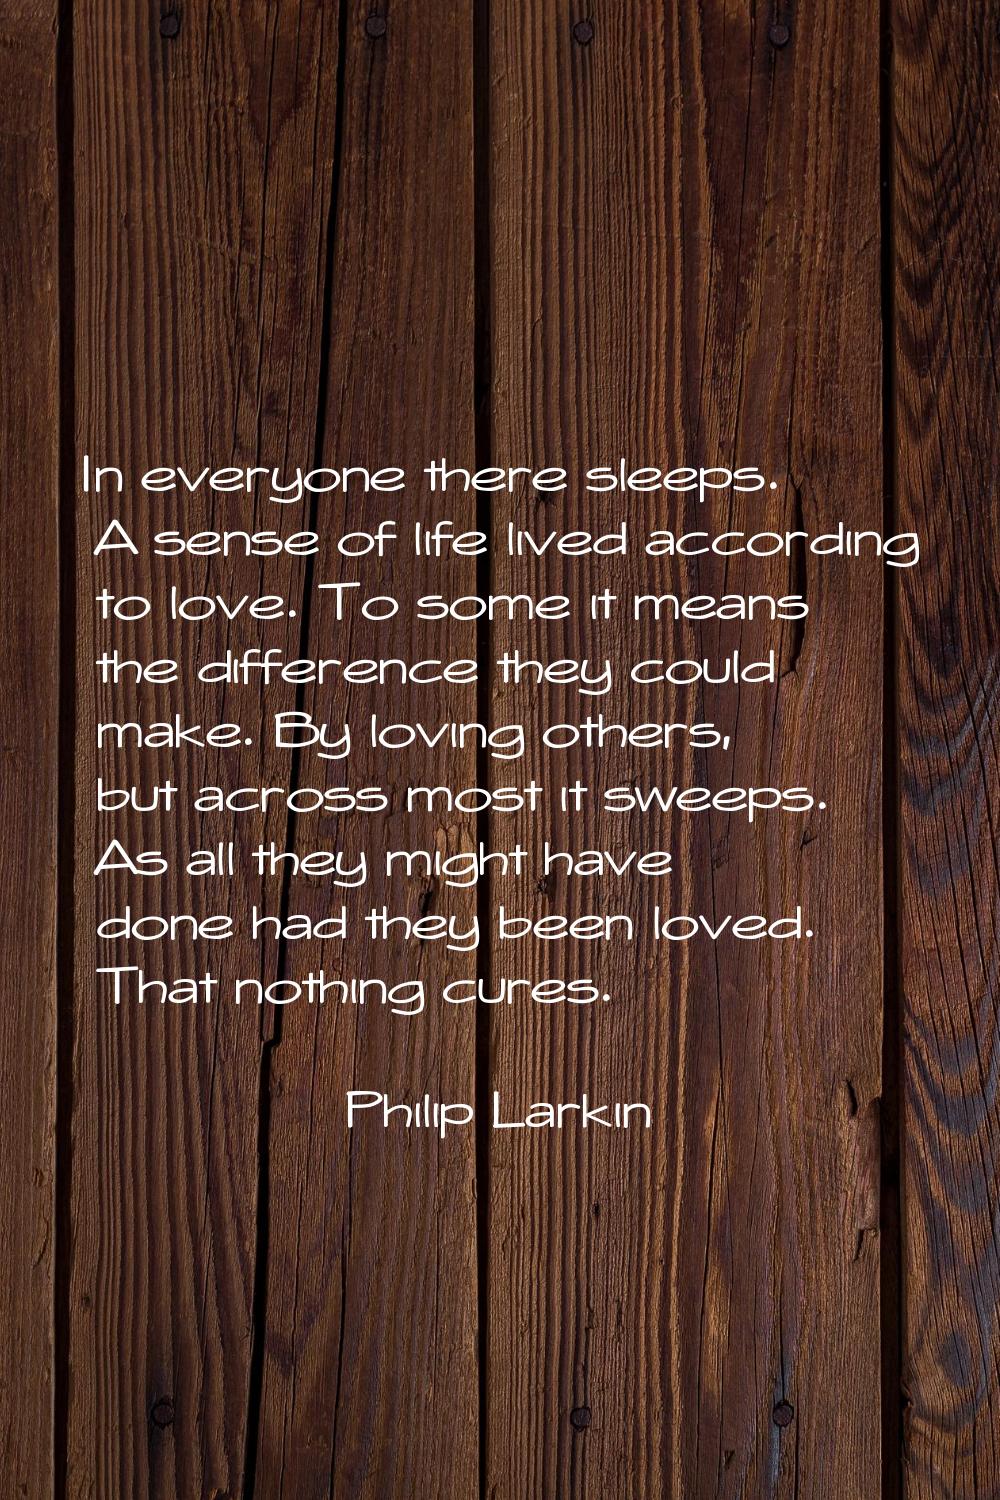 In everyone there sleeps. A sense of life lived according to love. To some it means the difference 